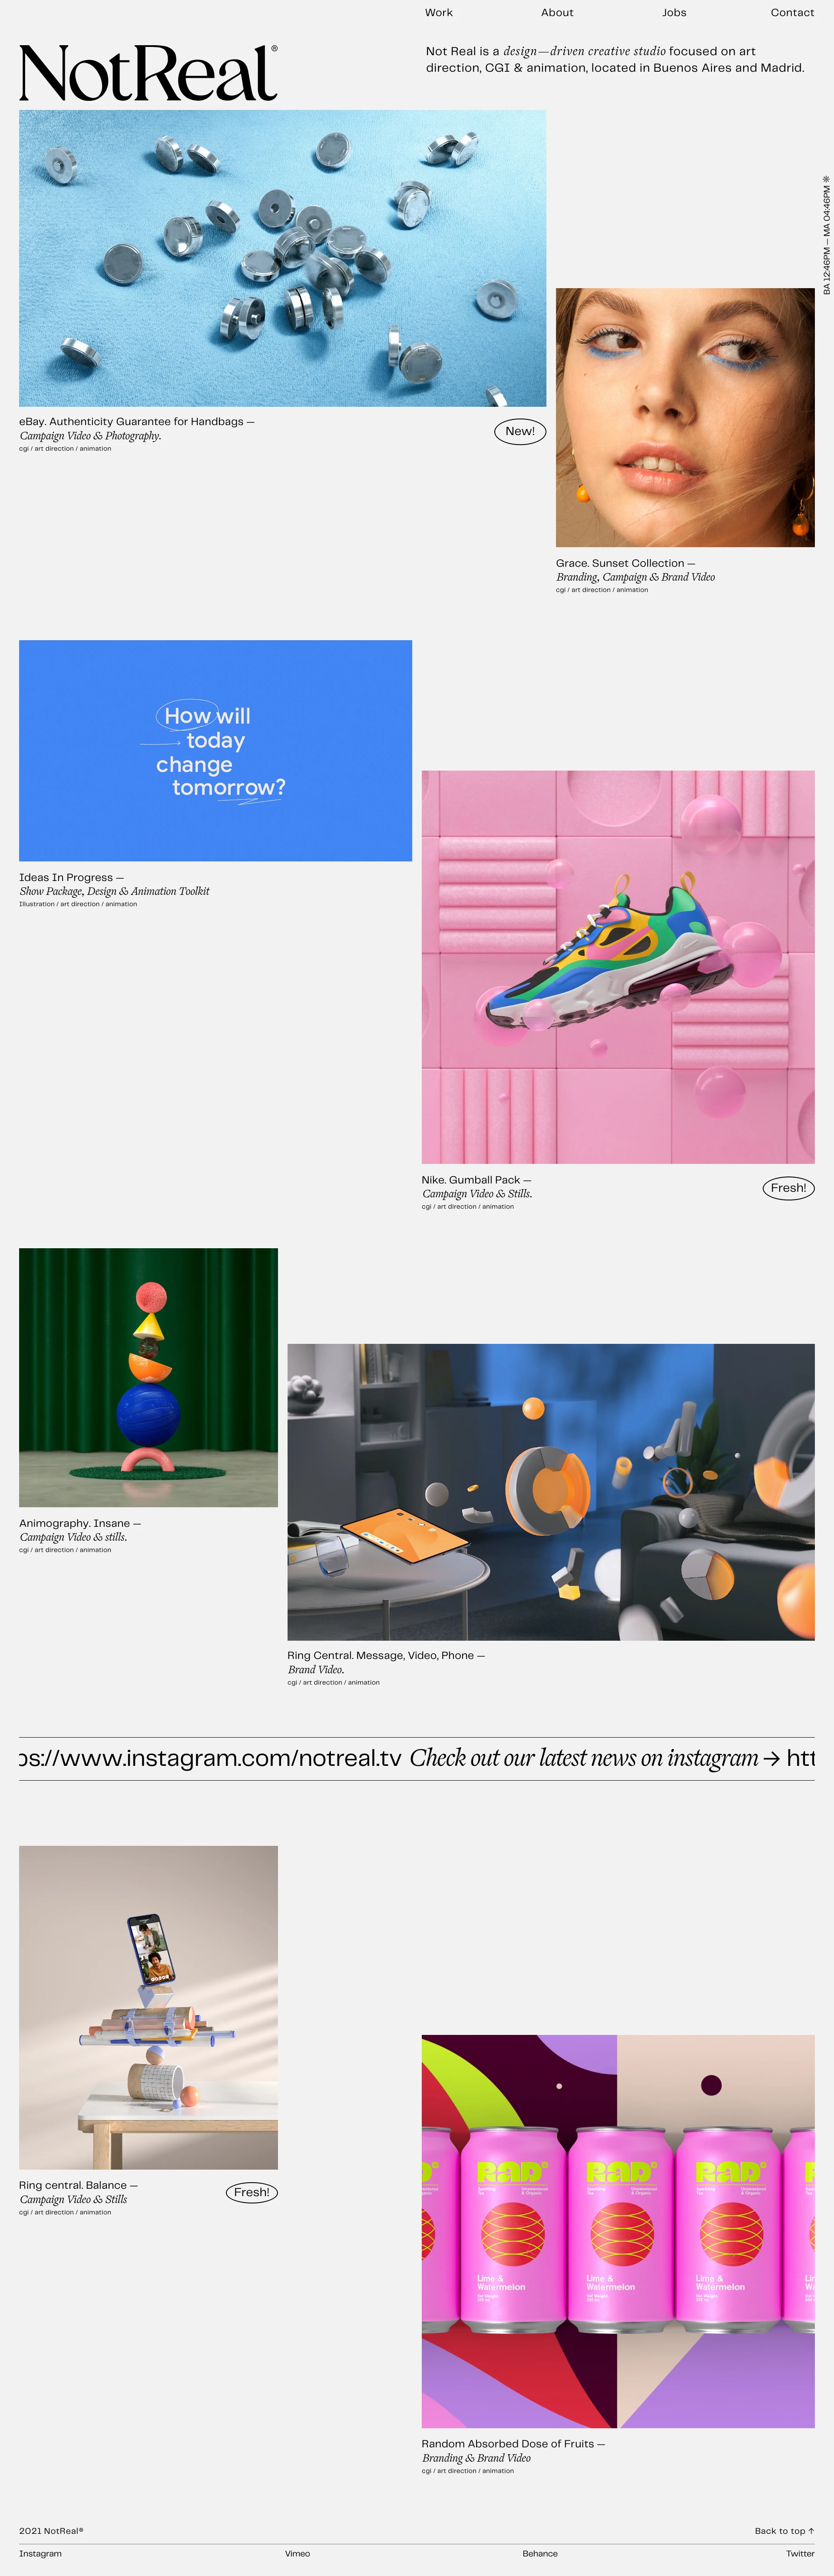 Not Real Landing Page Example: Not Real is a design—driven creative studio focused on art direction, CGI & animation, located in Buenos Aires and Madrid.